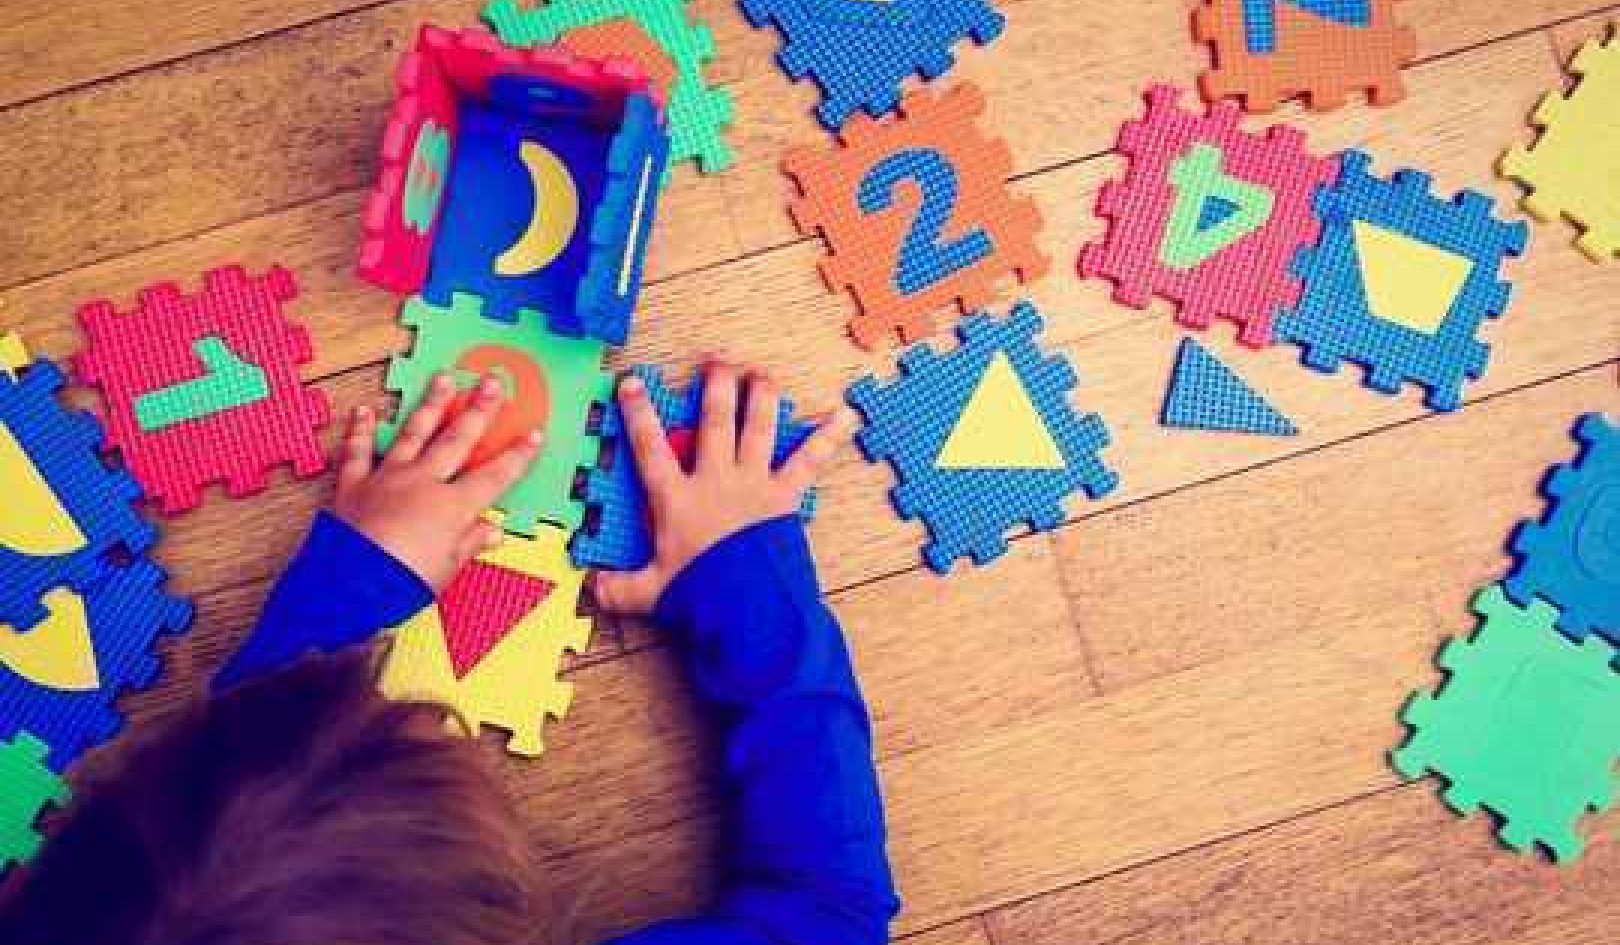 How To Get Preschoolers Ready To Learn Math